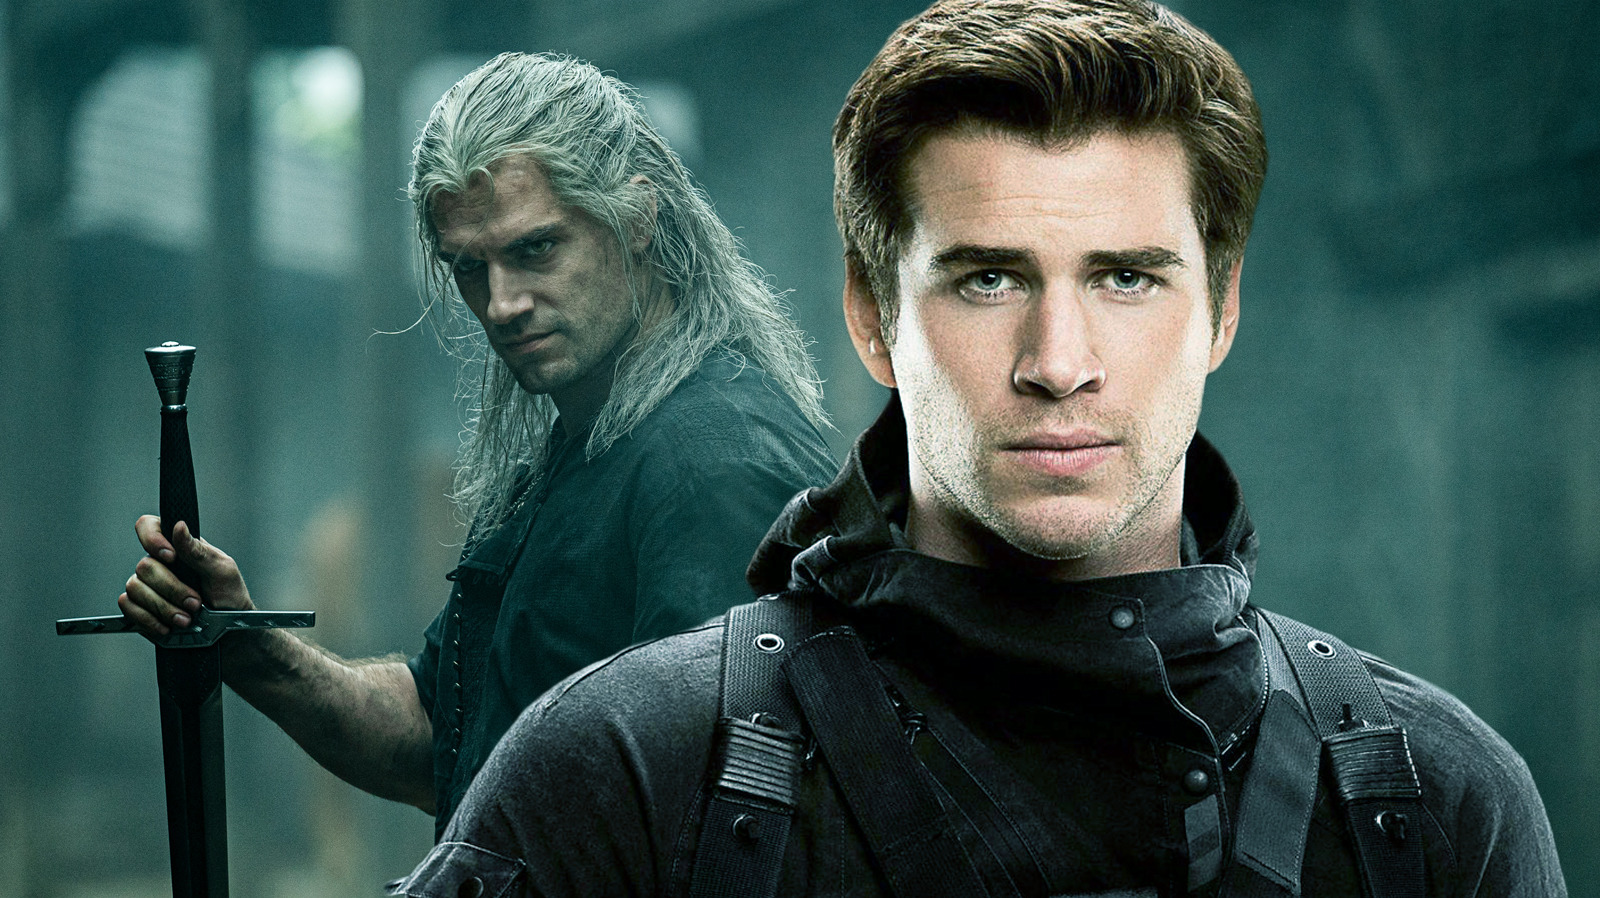 Liam Hemsworth to replace Henry Cavill as Geralt of Rivia on 'The Witcher' Season  4